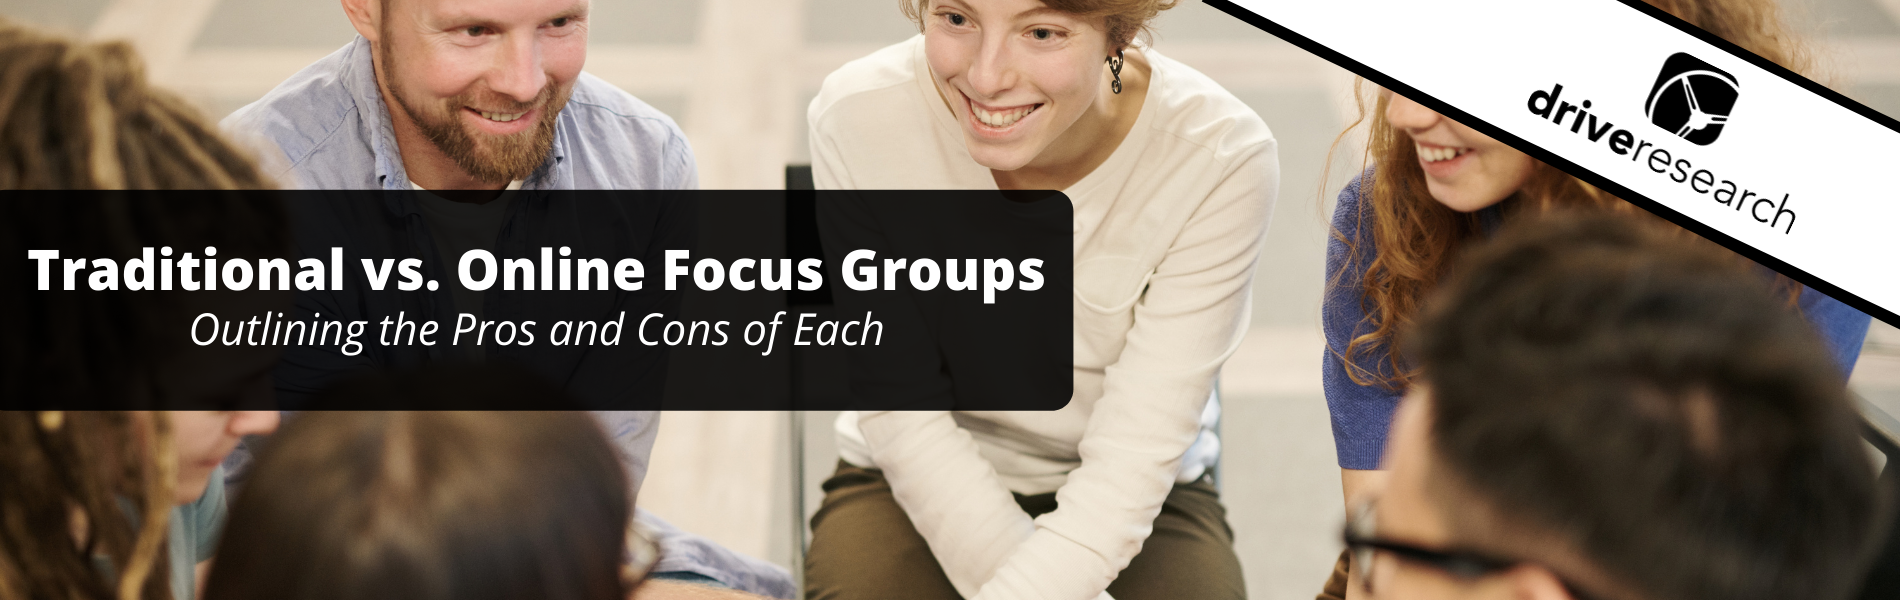 Traditional vs. Online Focus Groups